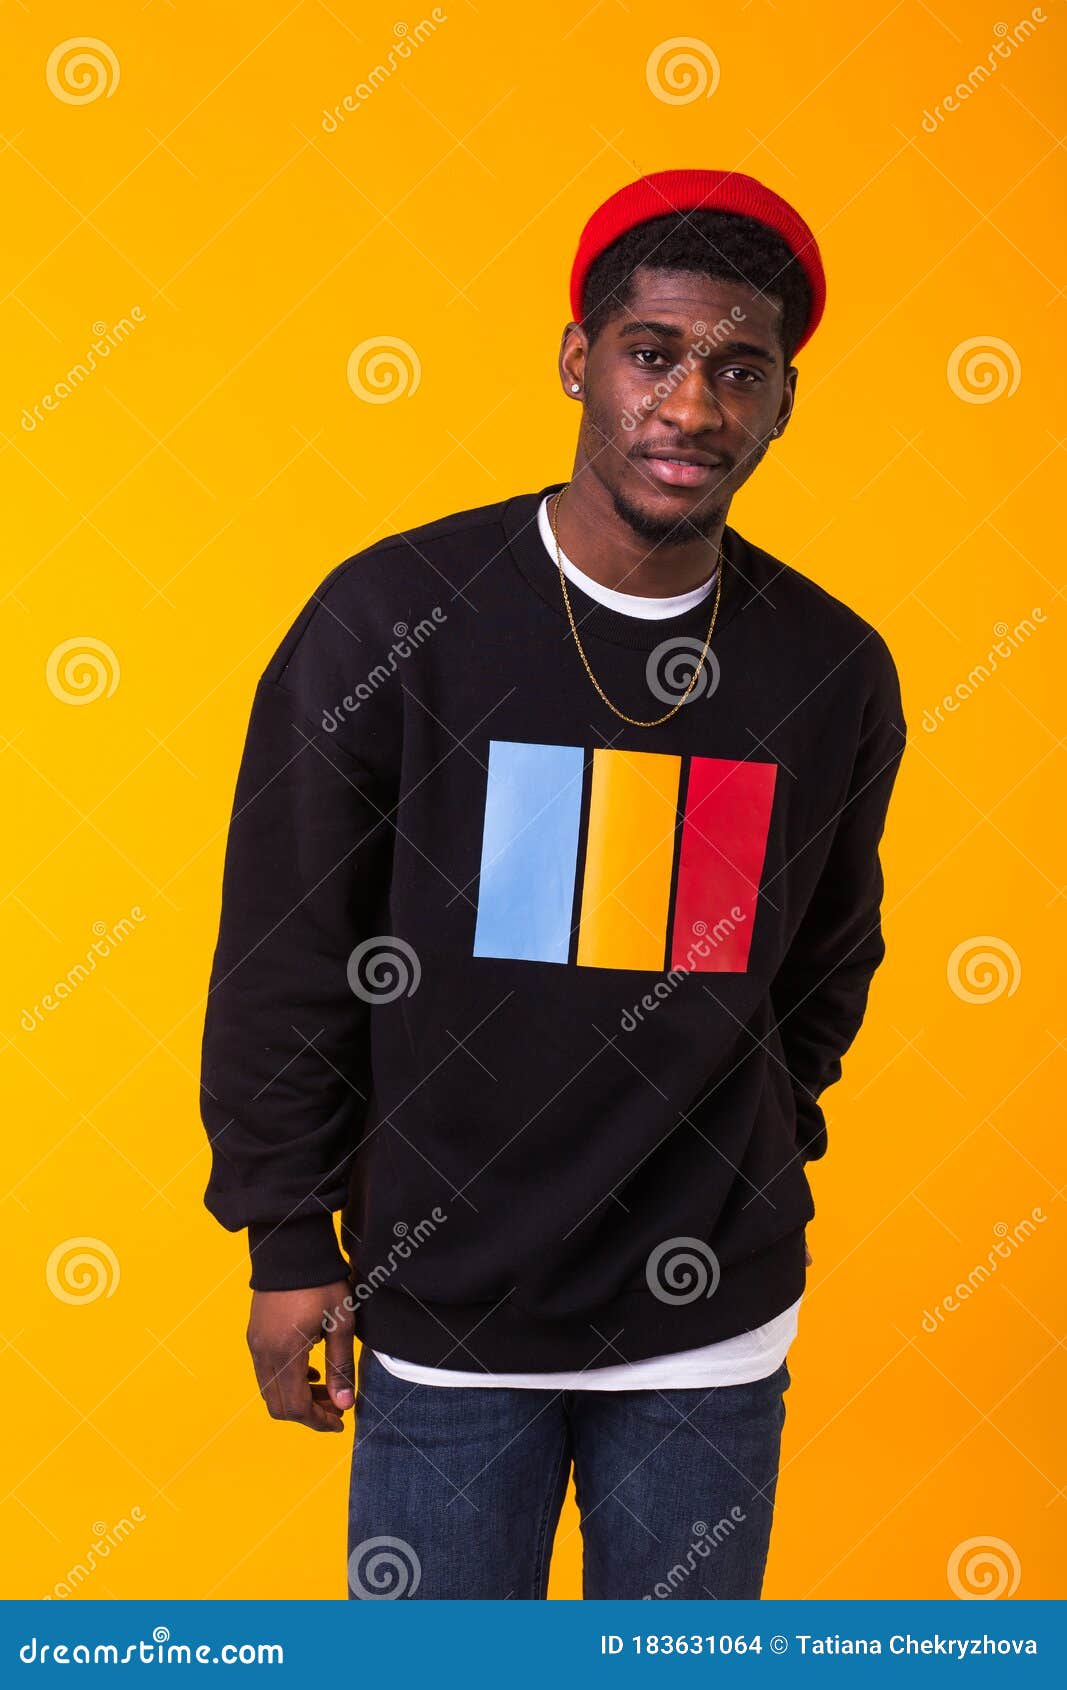 Youth Street Fashion Concept - Portrait of Confident Black Man in ...